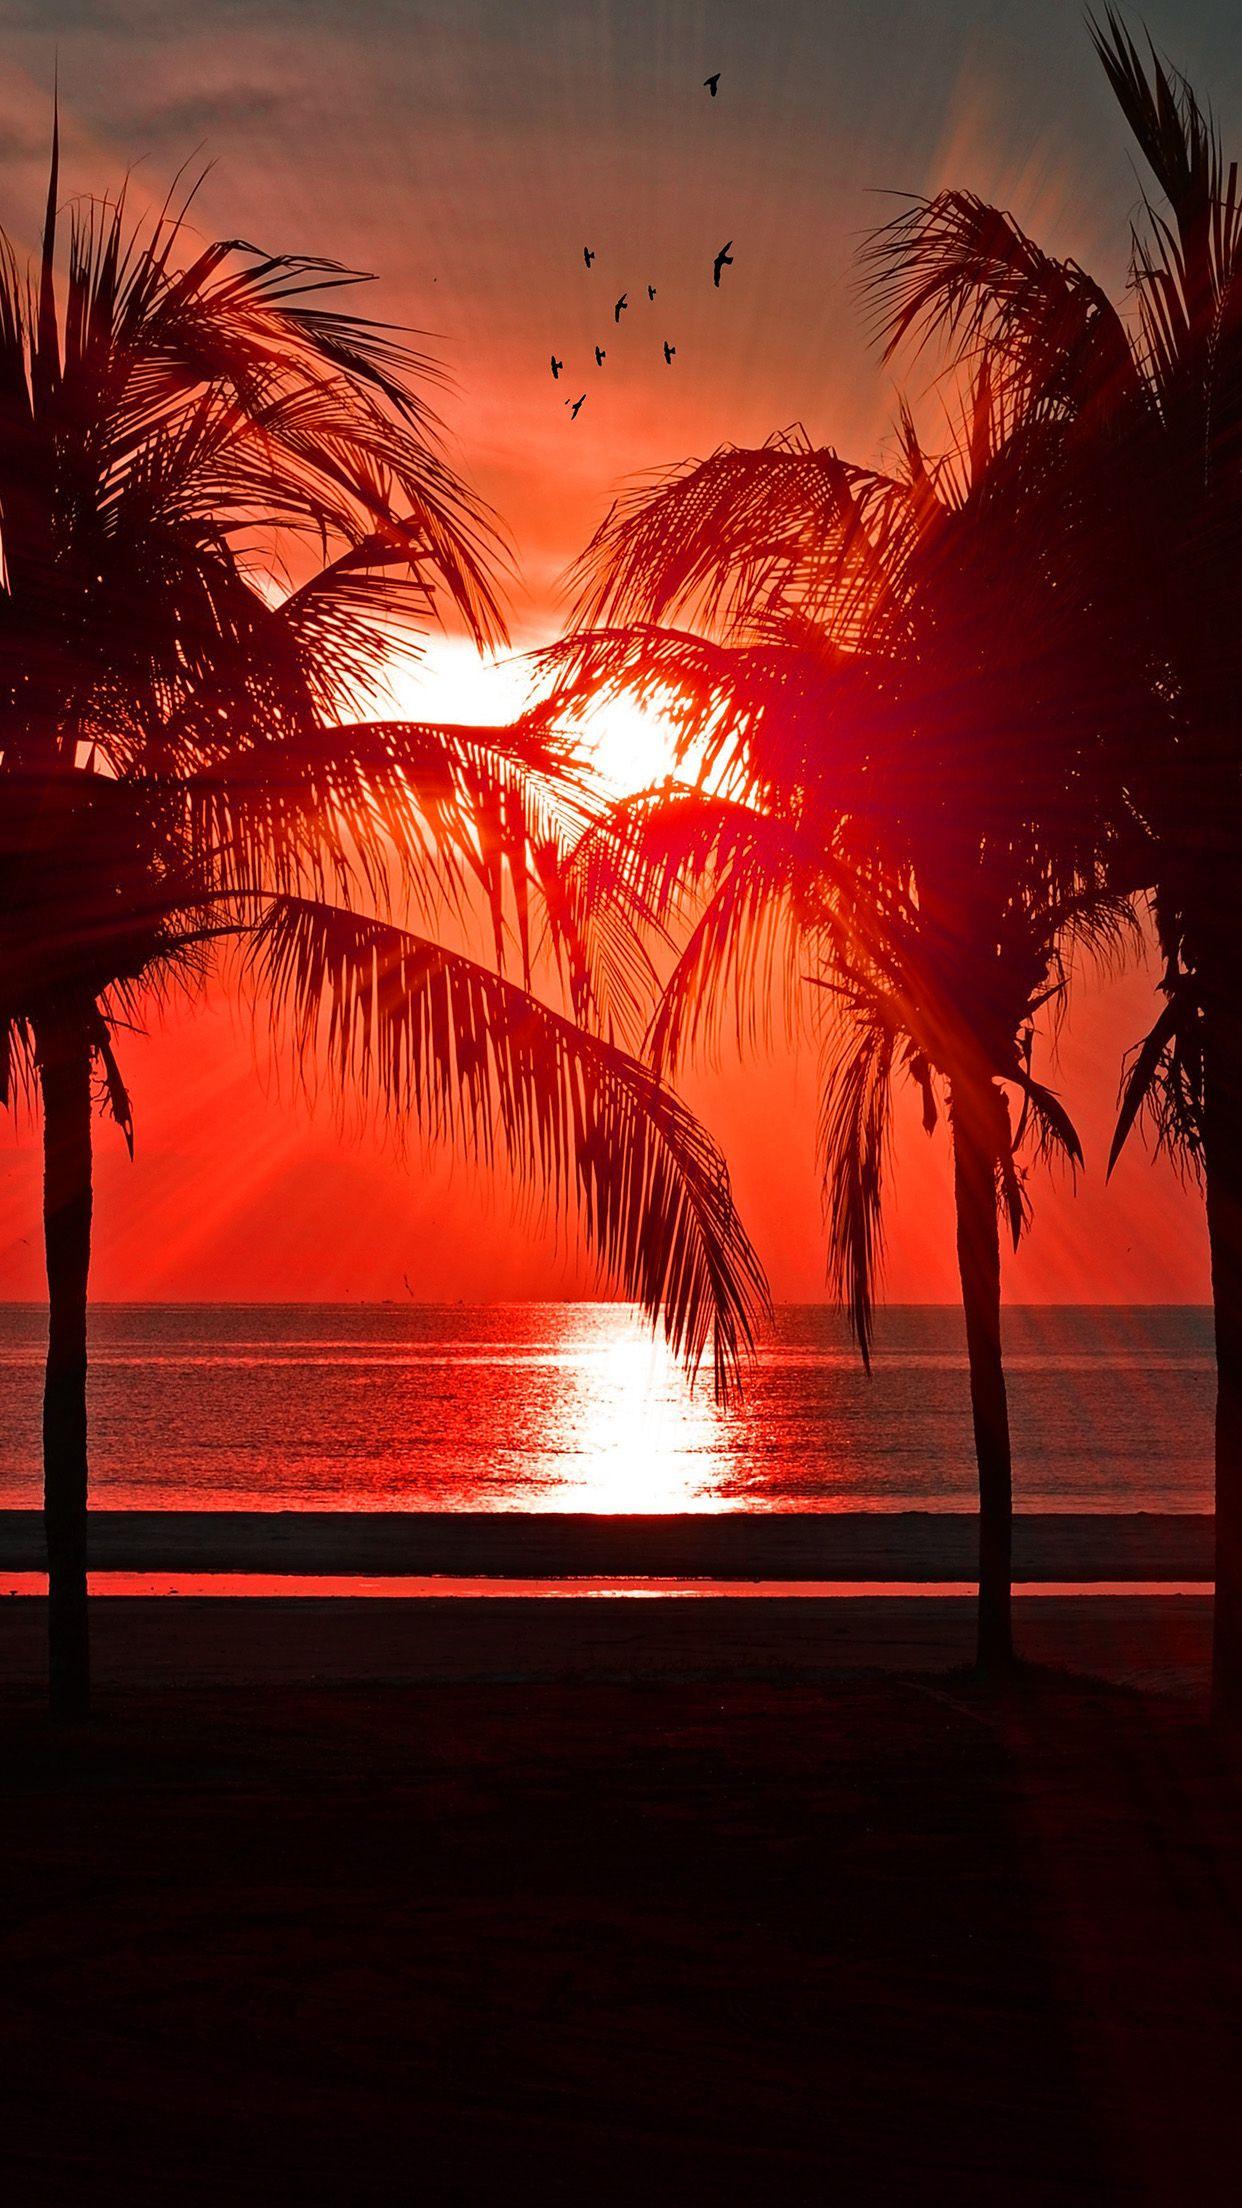 Palm Tree Sunset Iphone Wallpapers Top Free Palm Tree Sunset Iphone